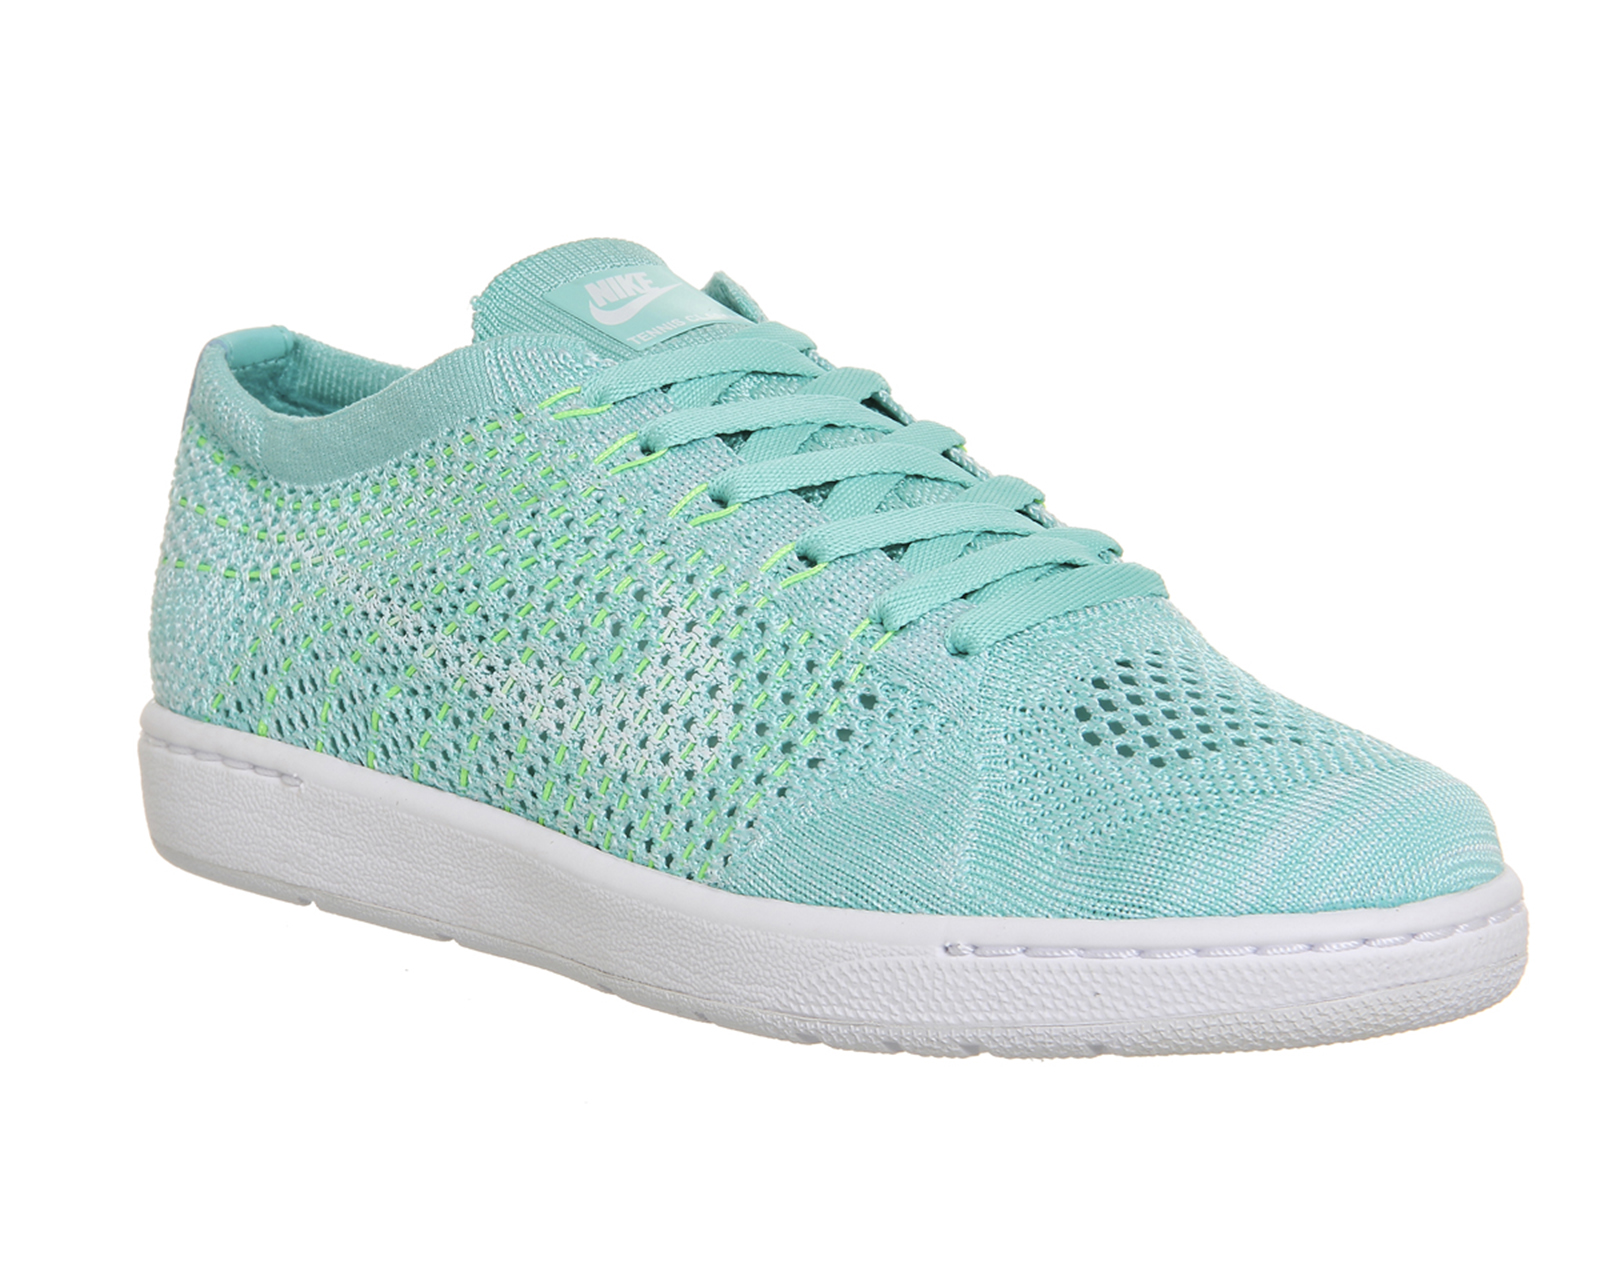 NikeTennis Classic Ultra Flyknit WHyper Turquoise White